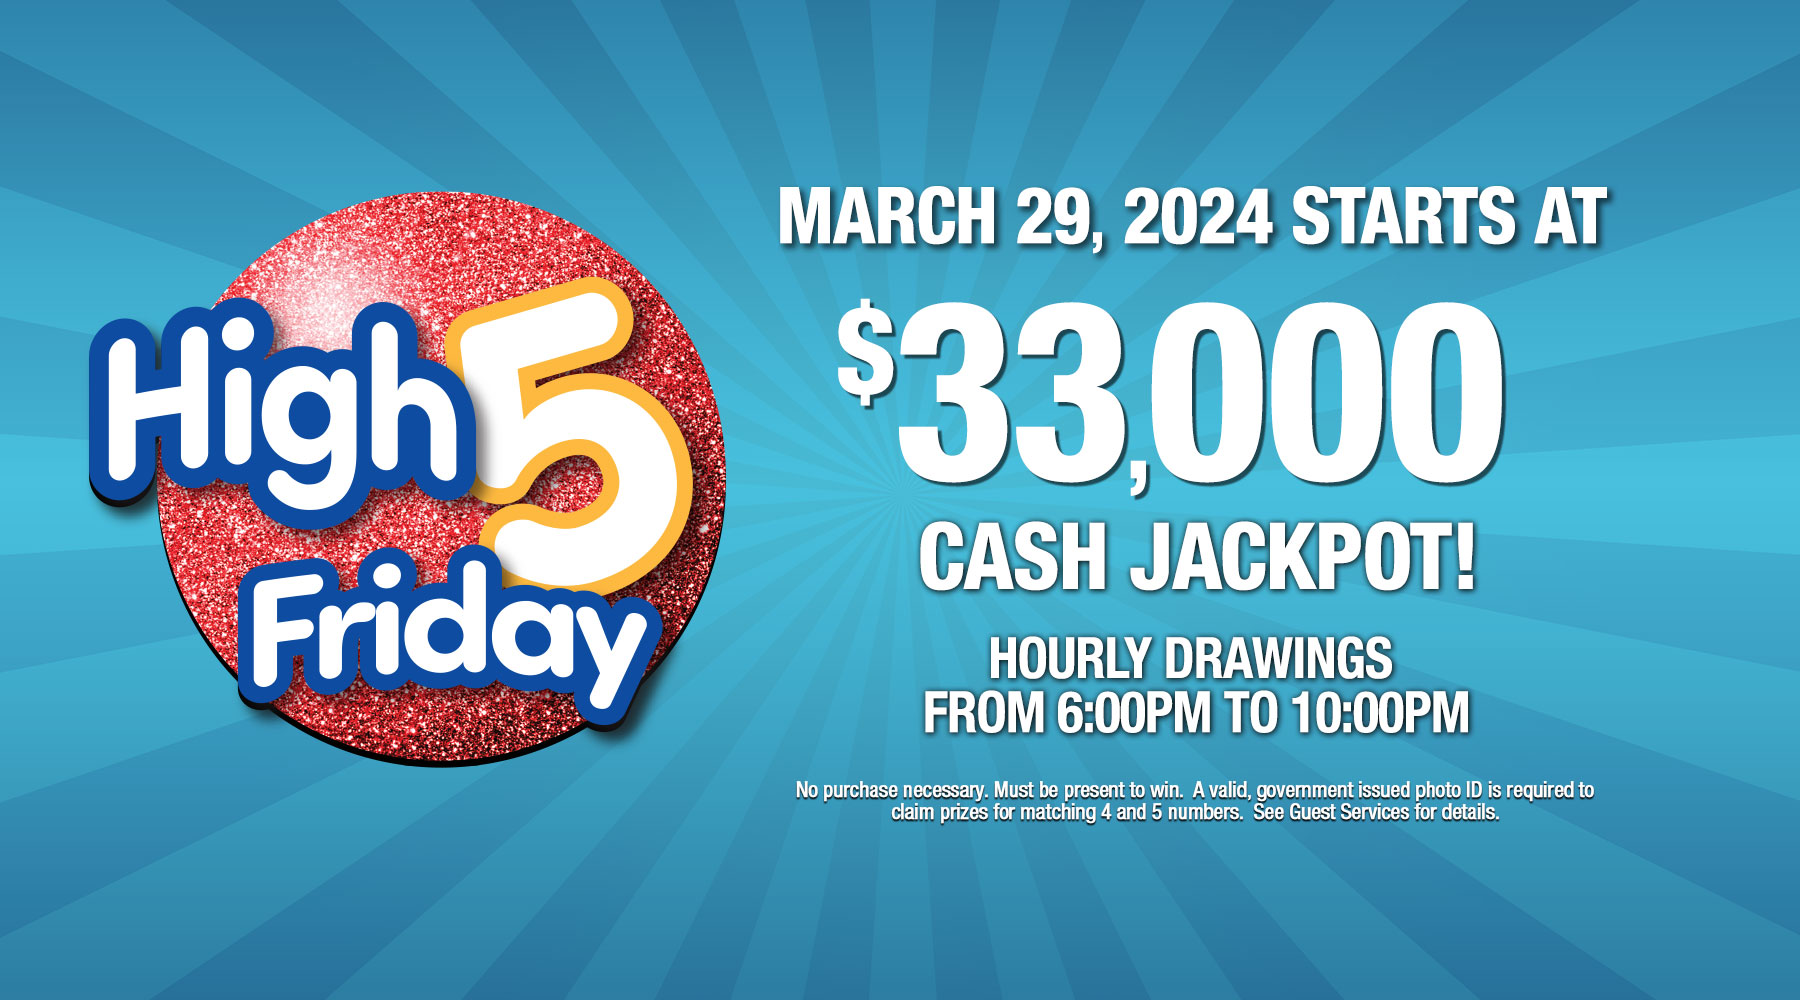 High 5 Friday CASH jackpot starts at $33,000 on Friday, March 29, 2024